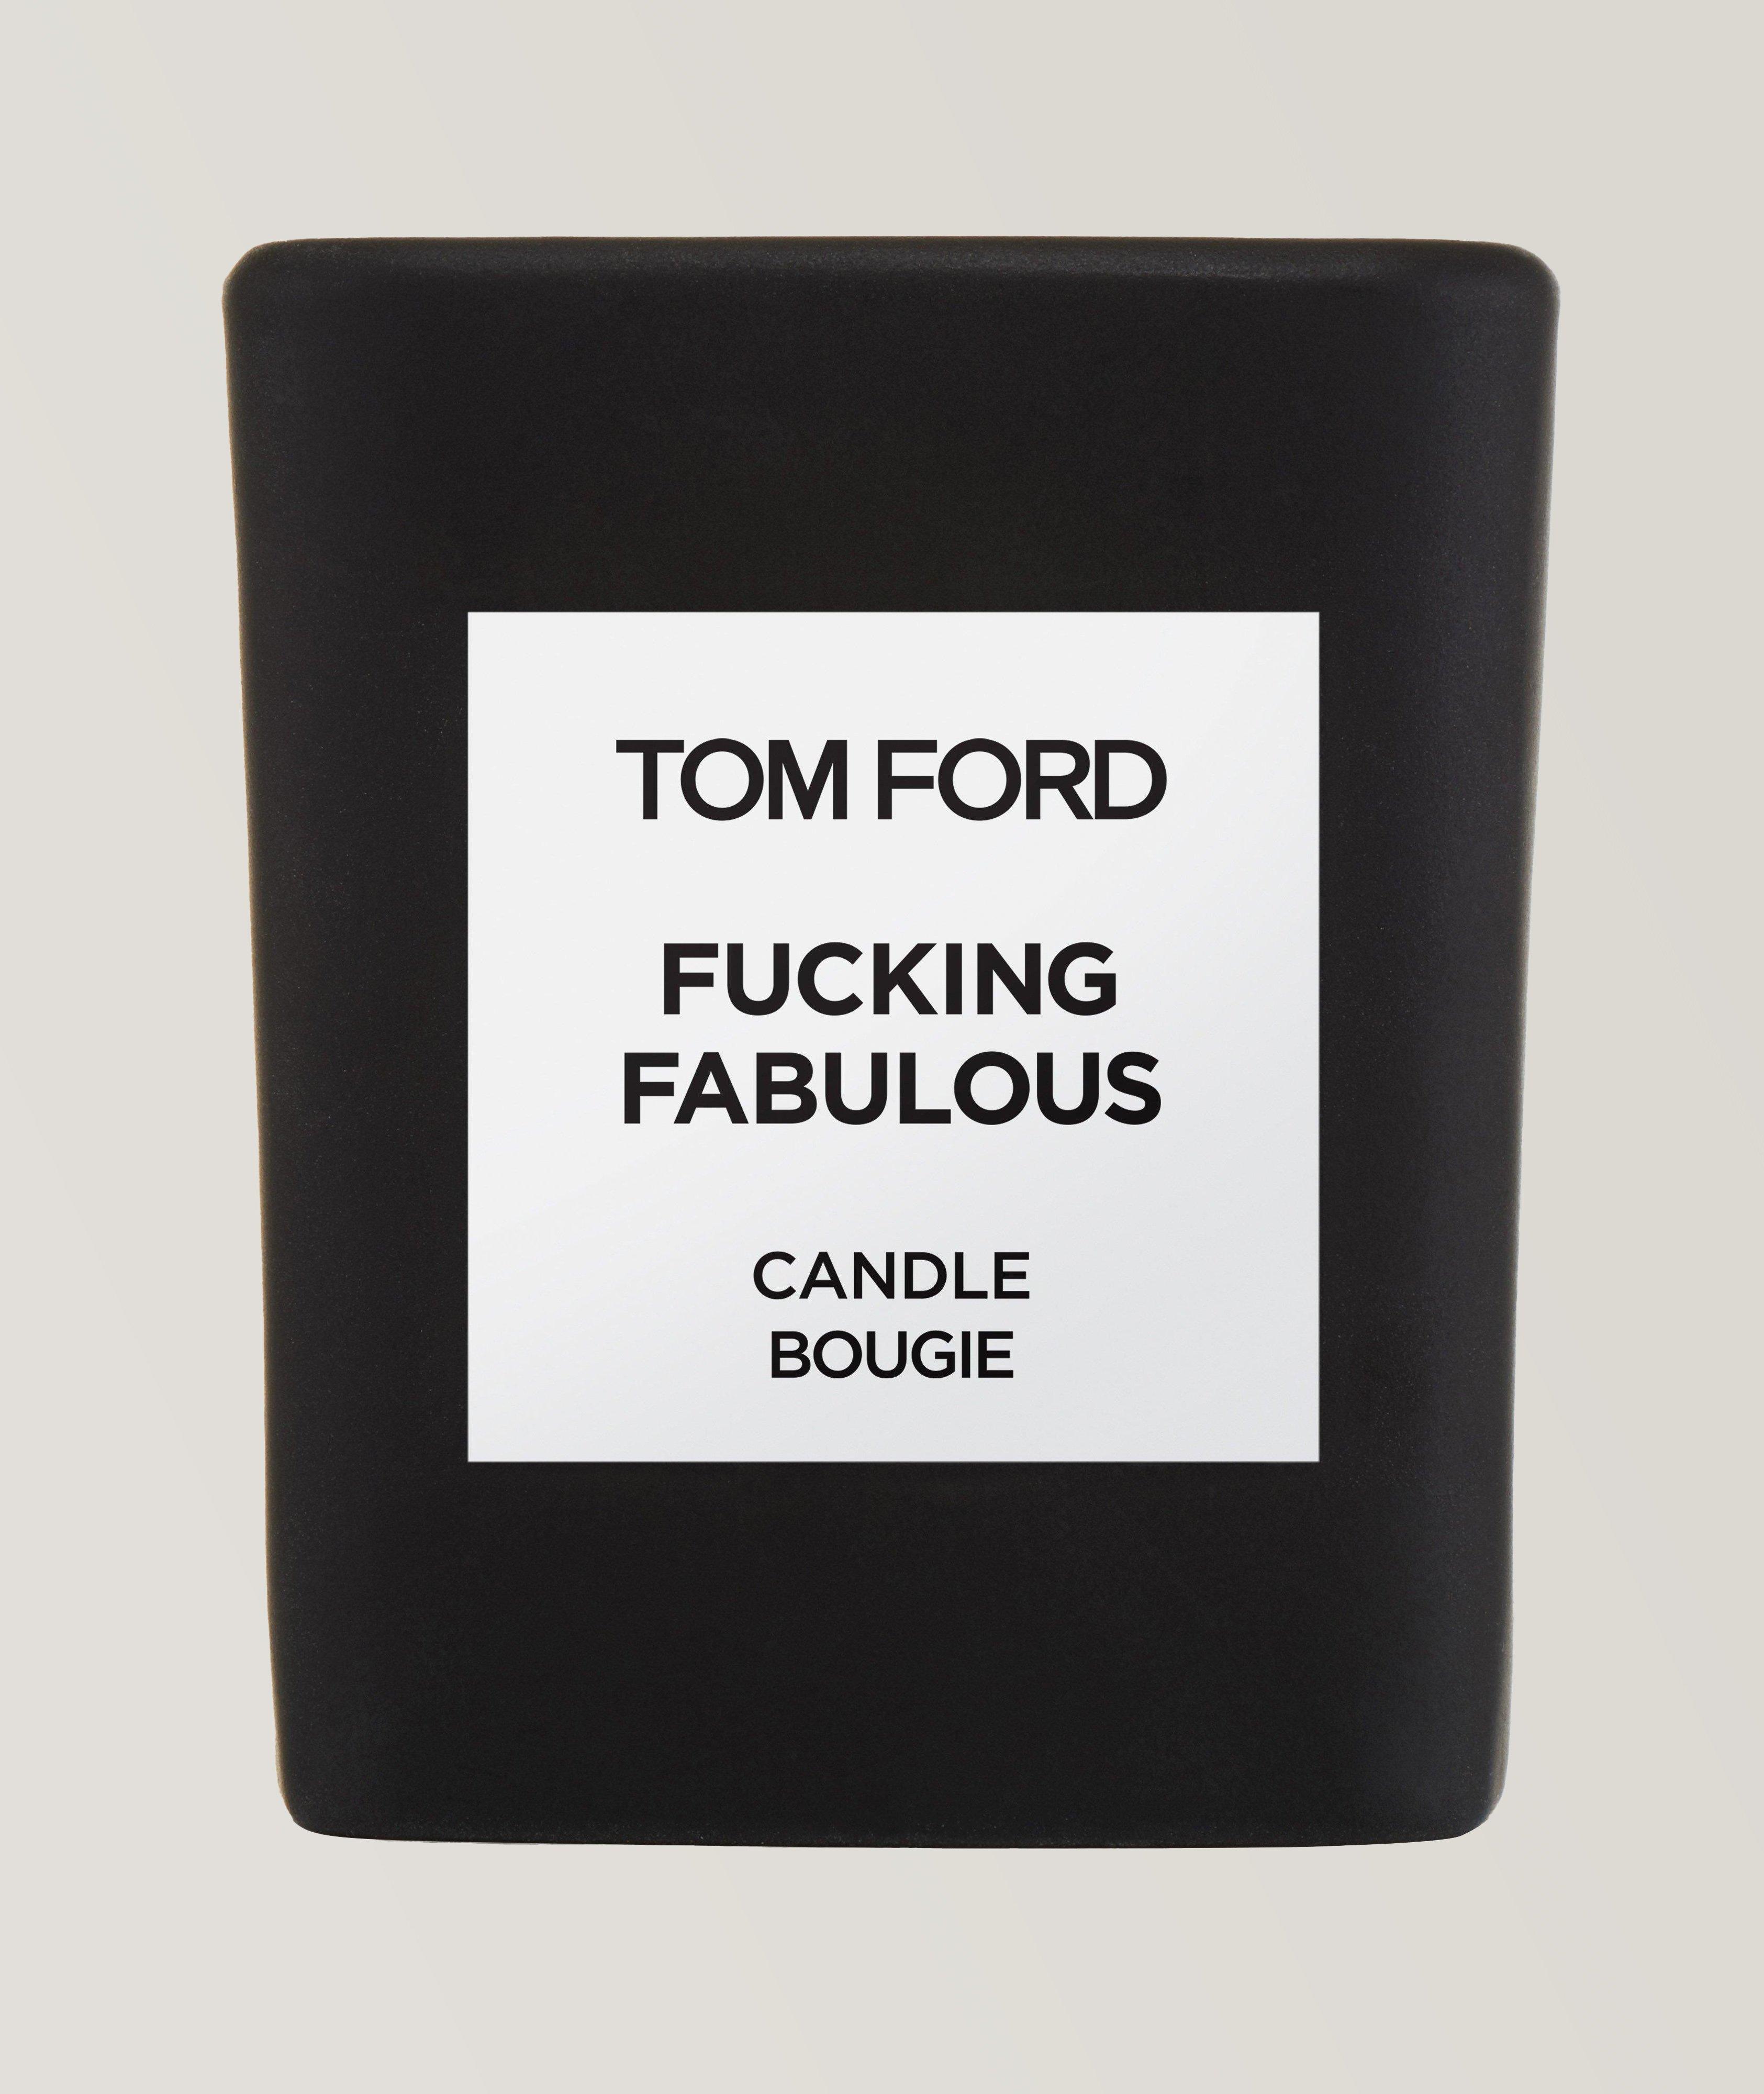 TOM FORD F*cking Fabulous Candle